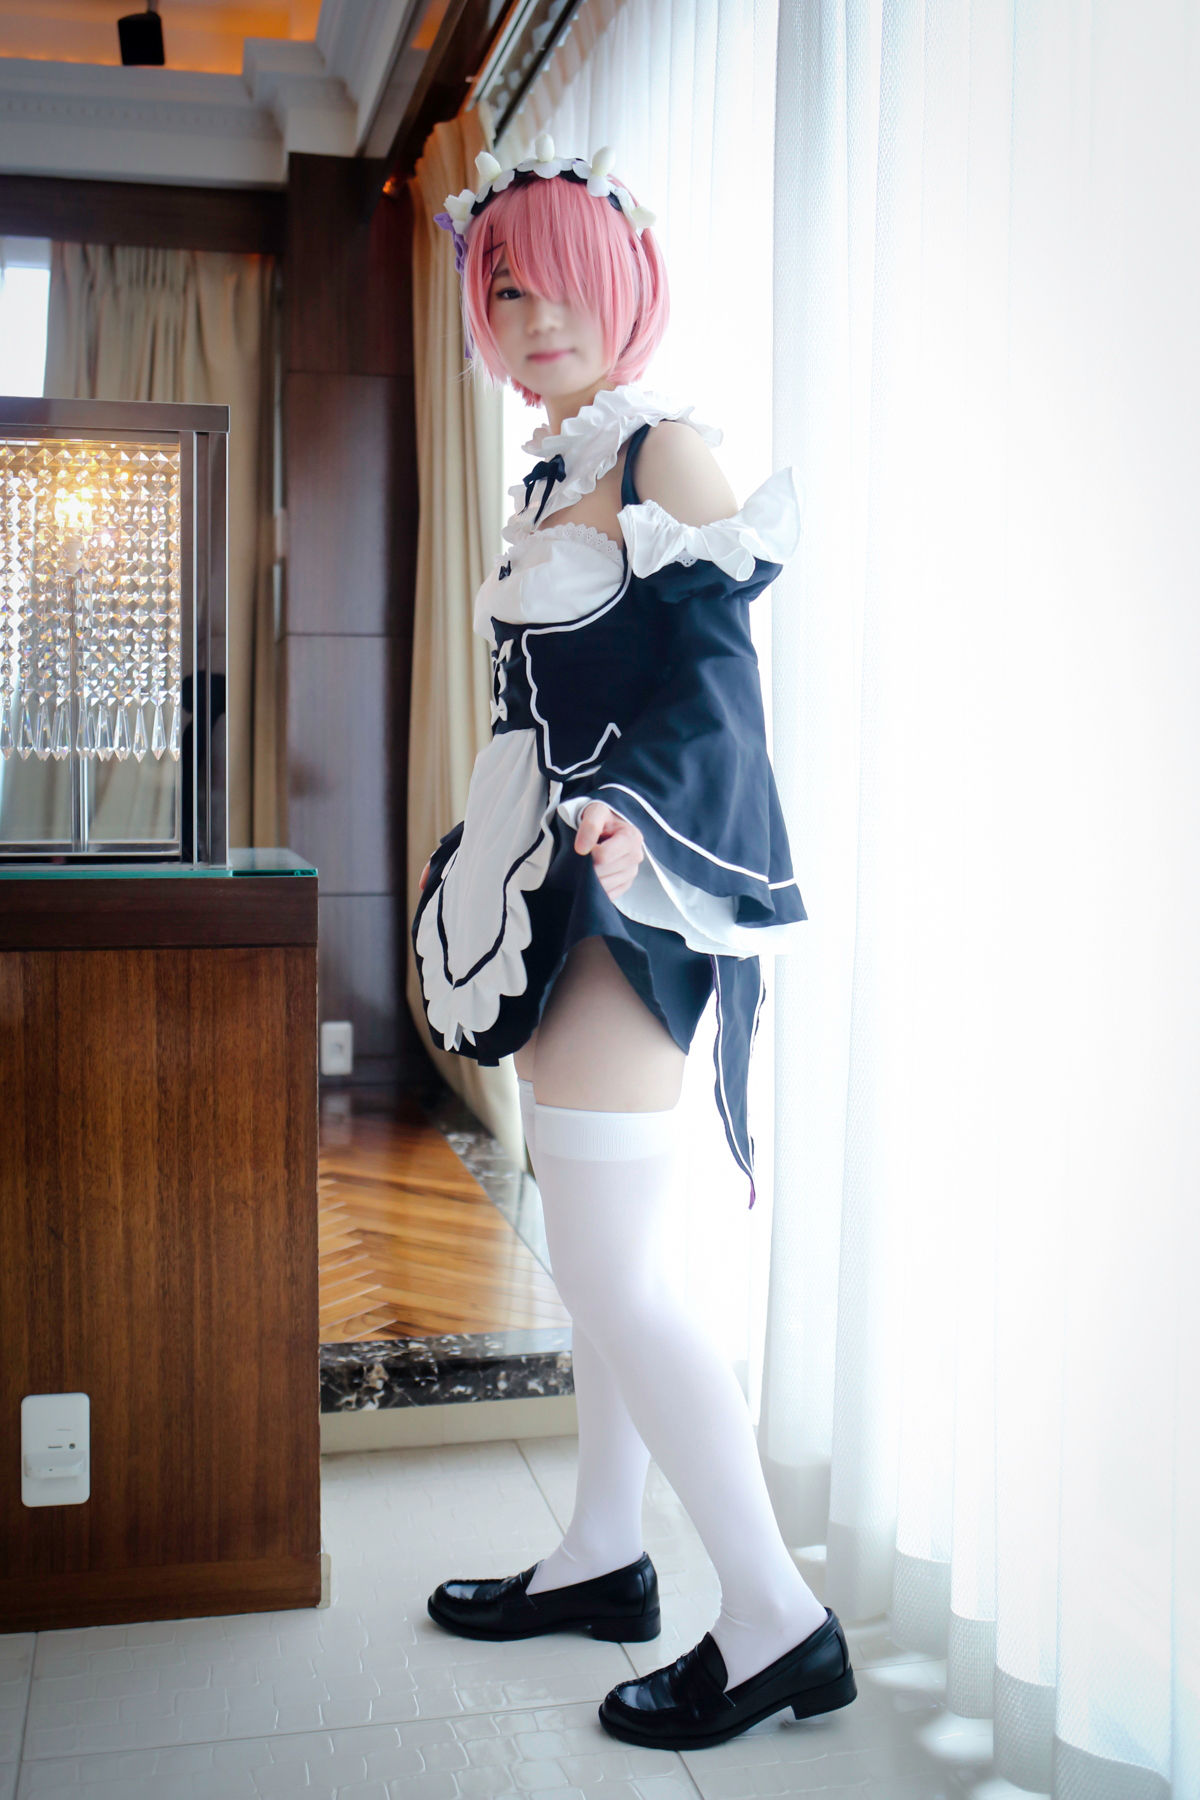 Naughty non REM ero Cosplay twin sister(7)